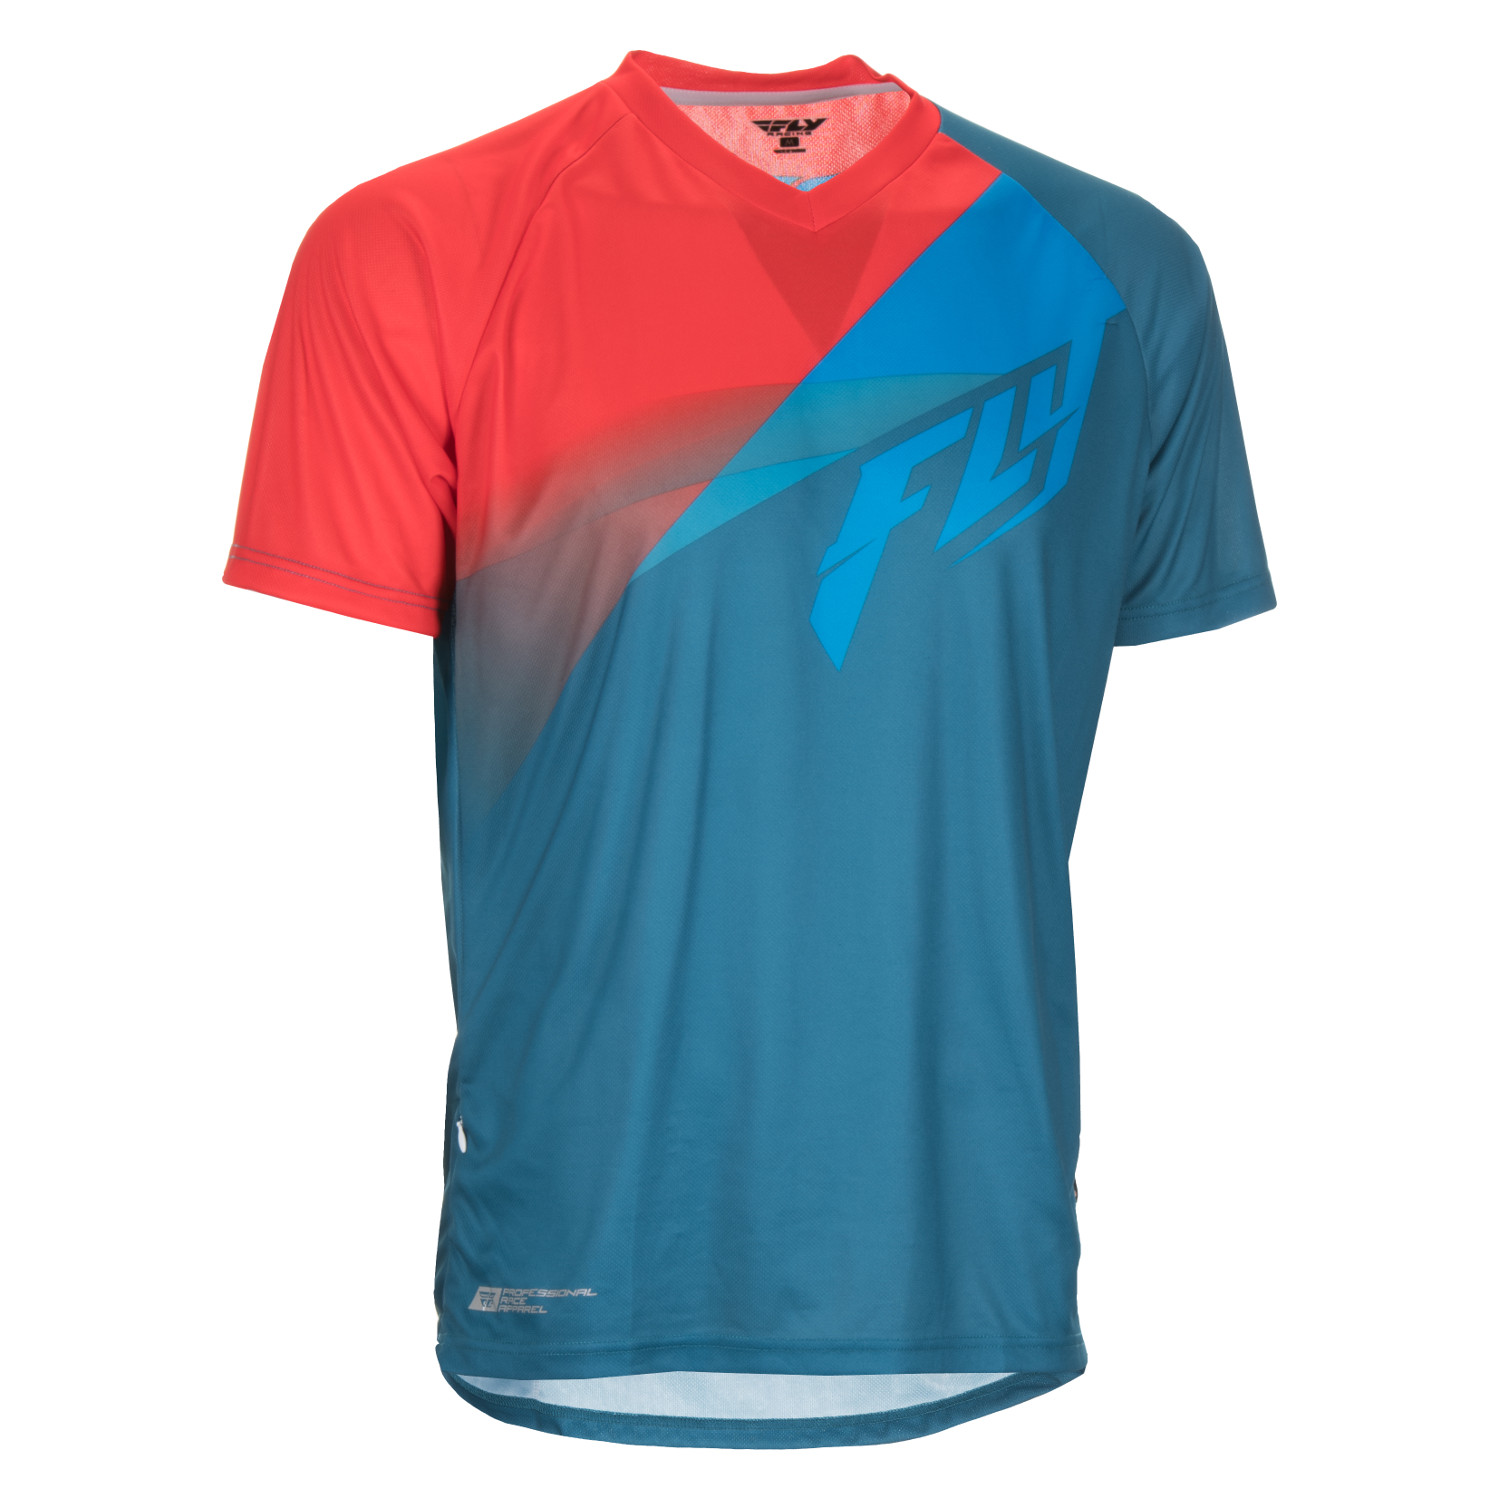 Fly Racing Maillot VTT Manches Courtes Super D Teal/Red